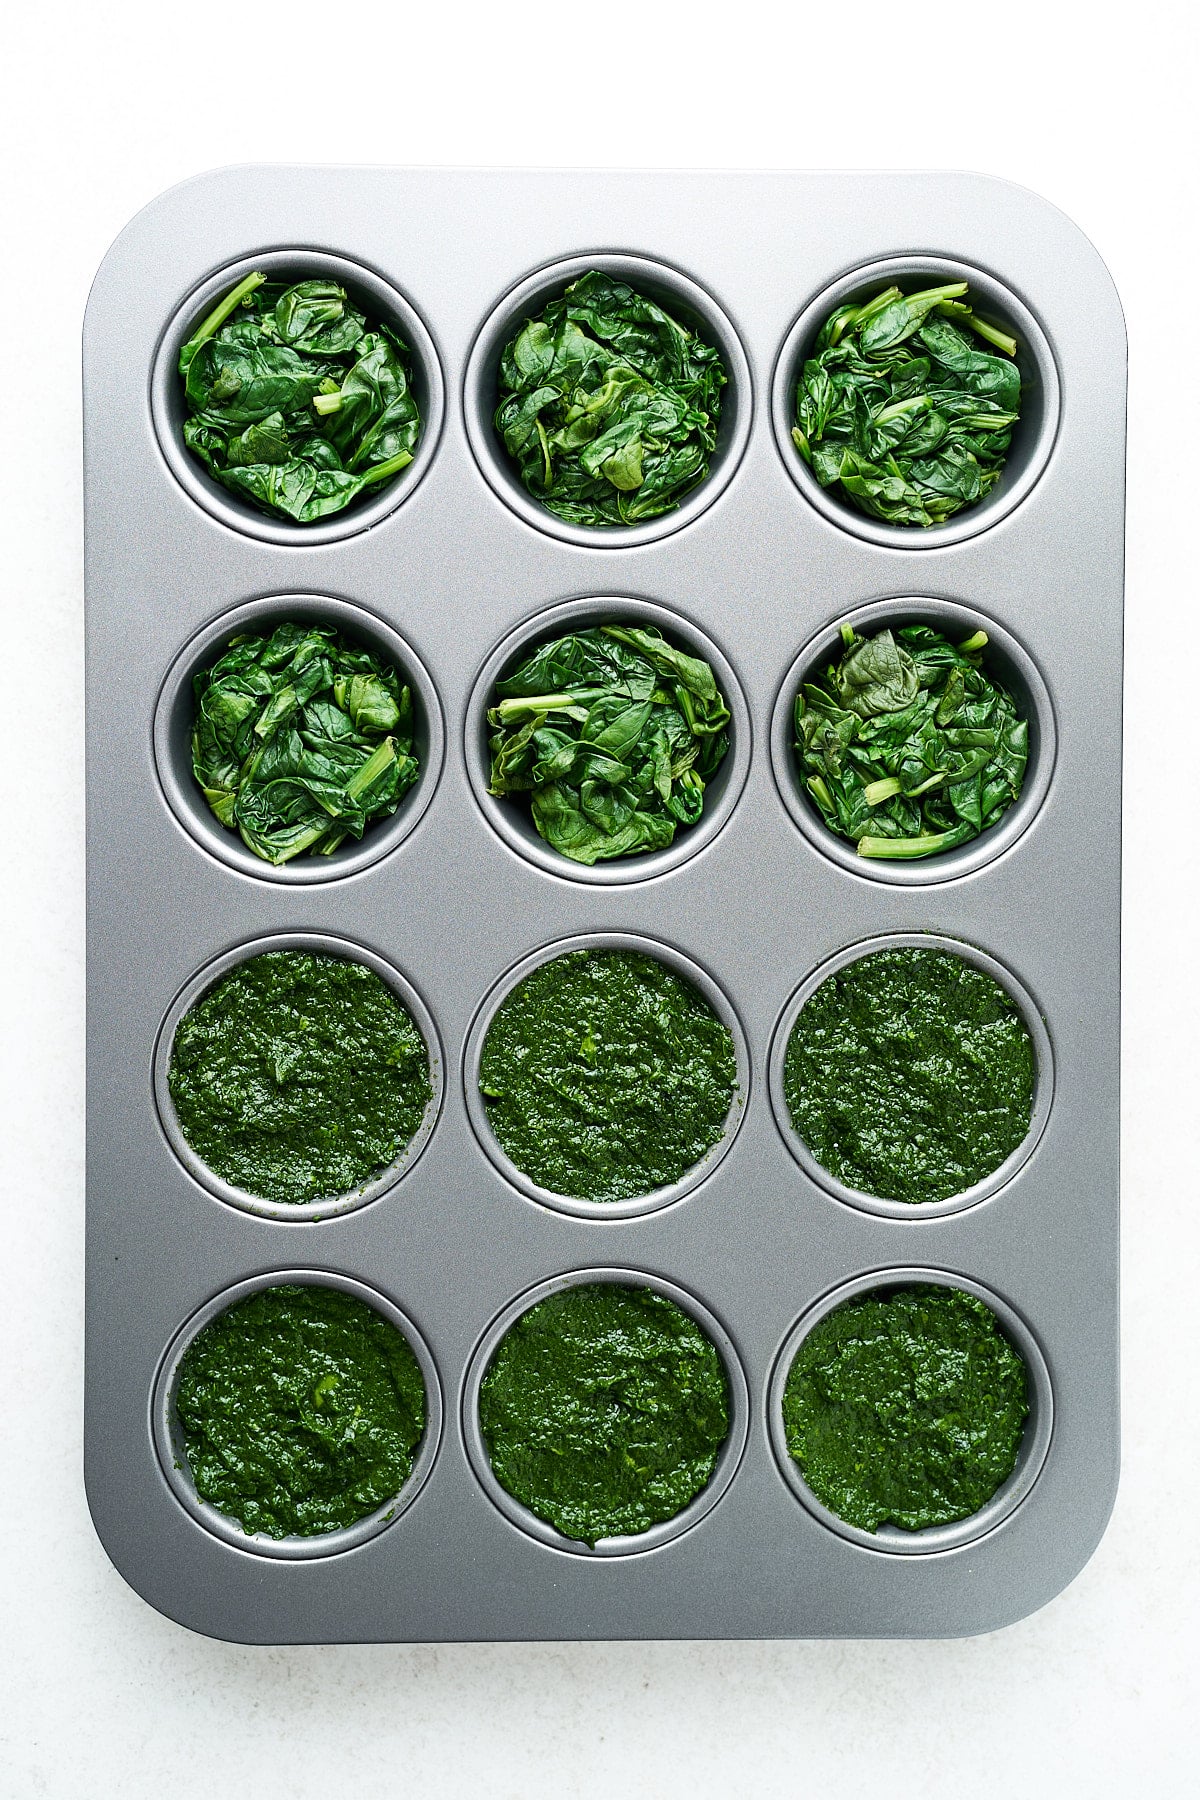 Pureed and blanched spinach in muffin cups.